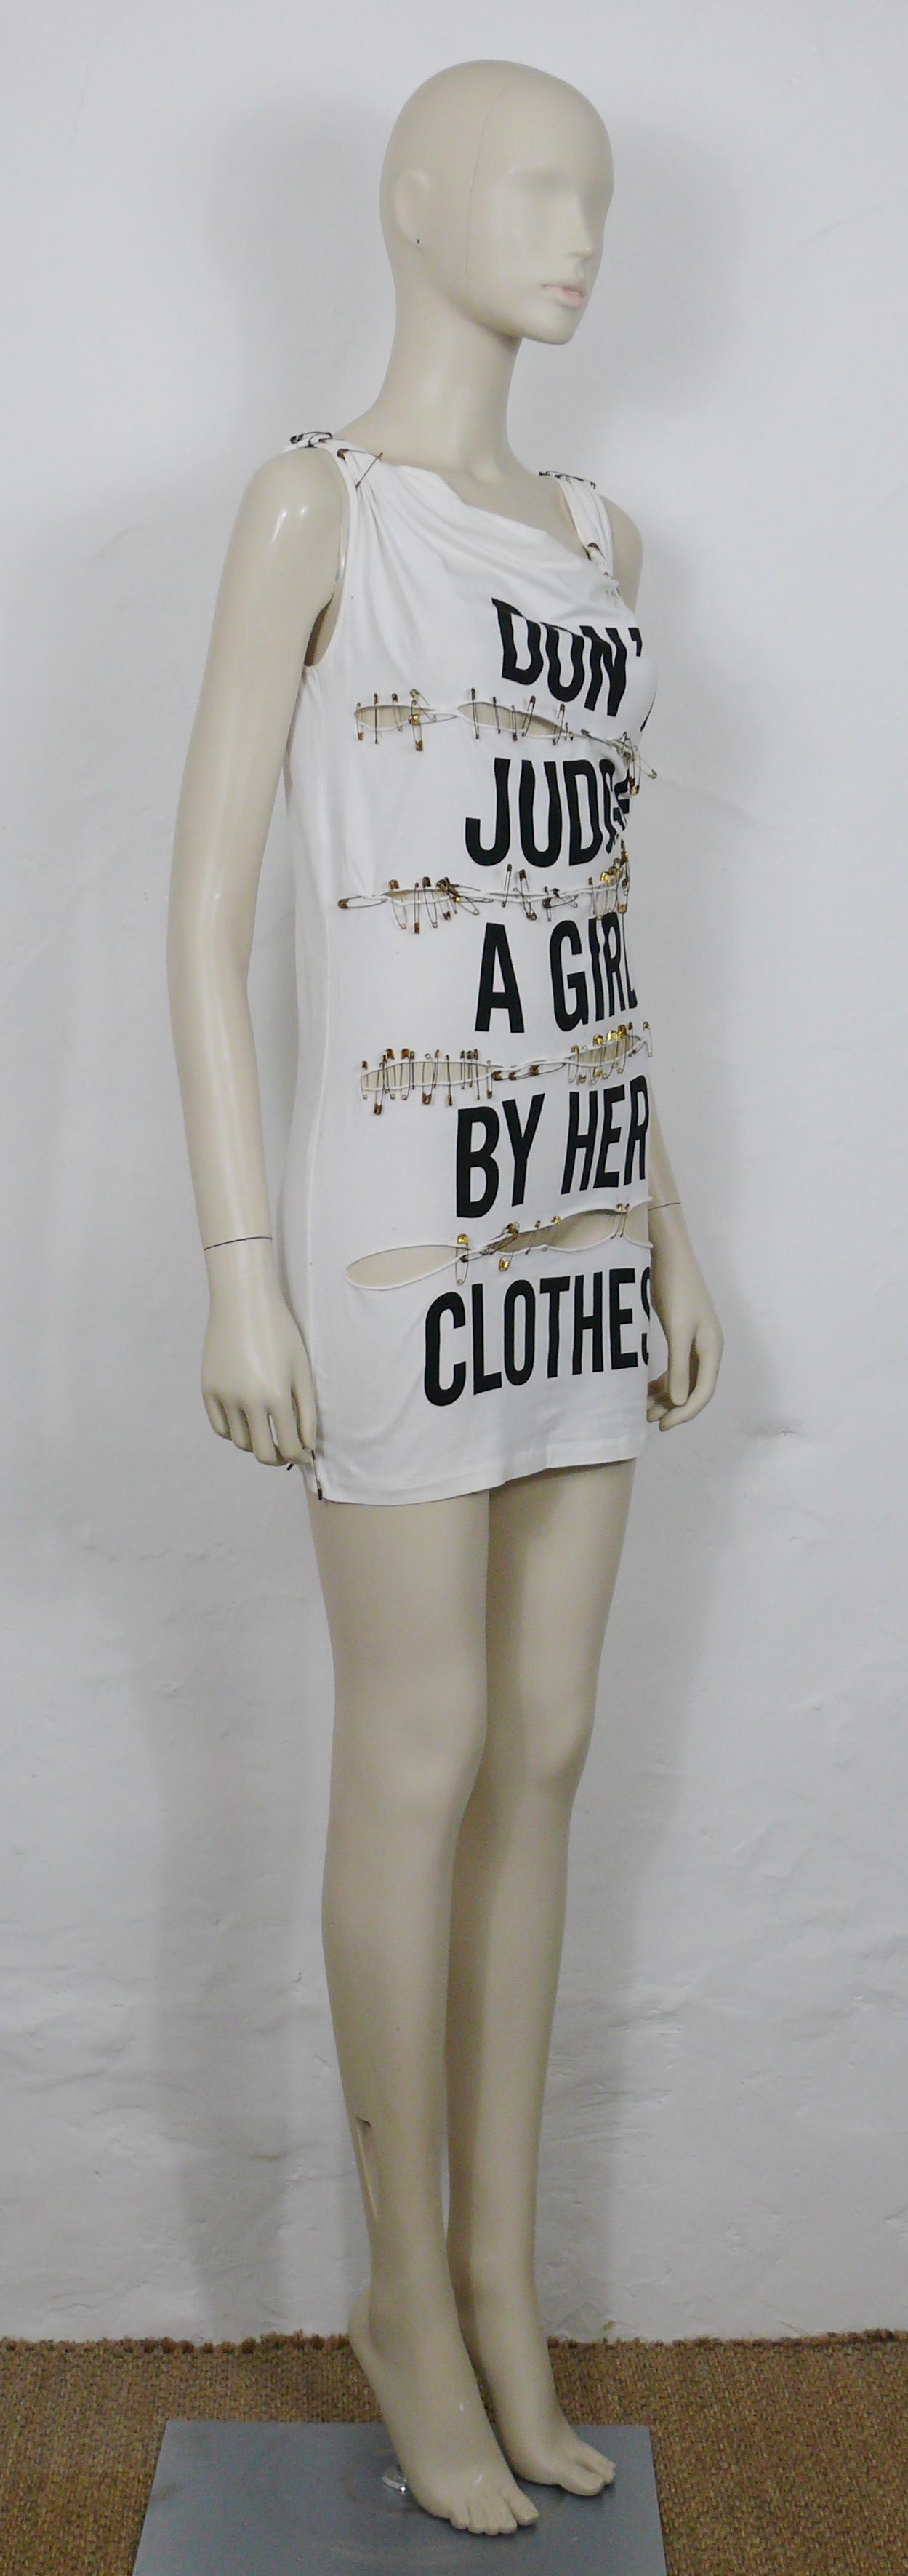 MOSCHINO vintage white cotton blend jersey DON'T JUDGE A GIRL BY HER CLOTHES mini sleeveless dress.

This dress features :
- White cotton blend jersey.
- Slashed front.
- Cowl neck.
- Gathered shoulders.
- Black slogan print 